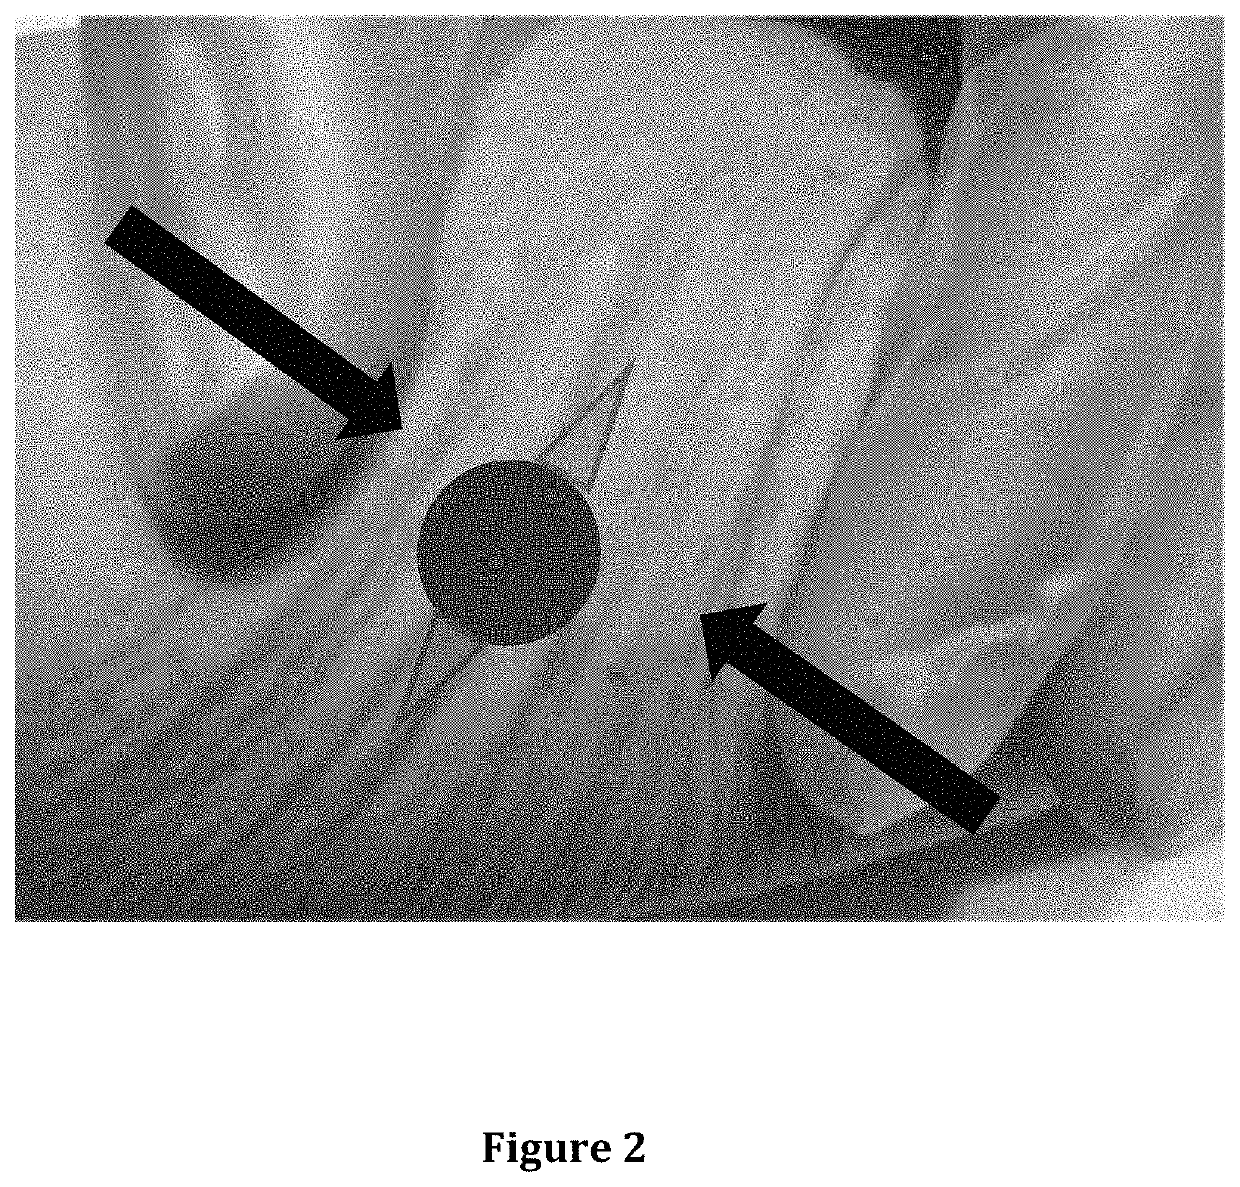 Apical surgical wound debridement